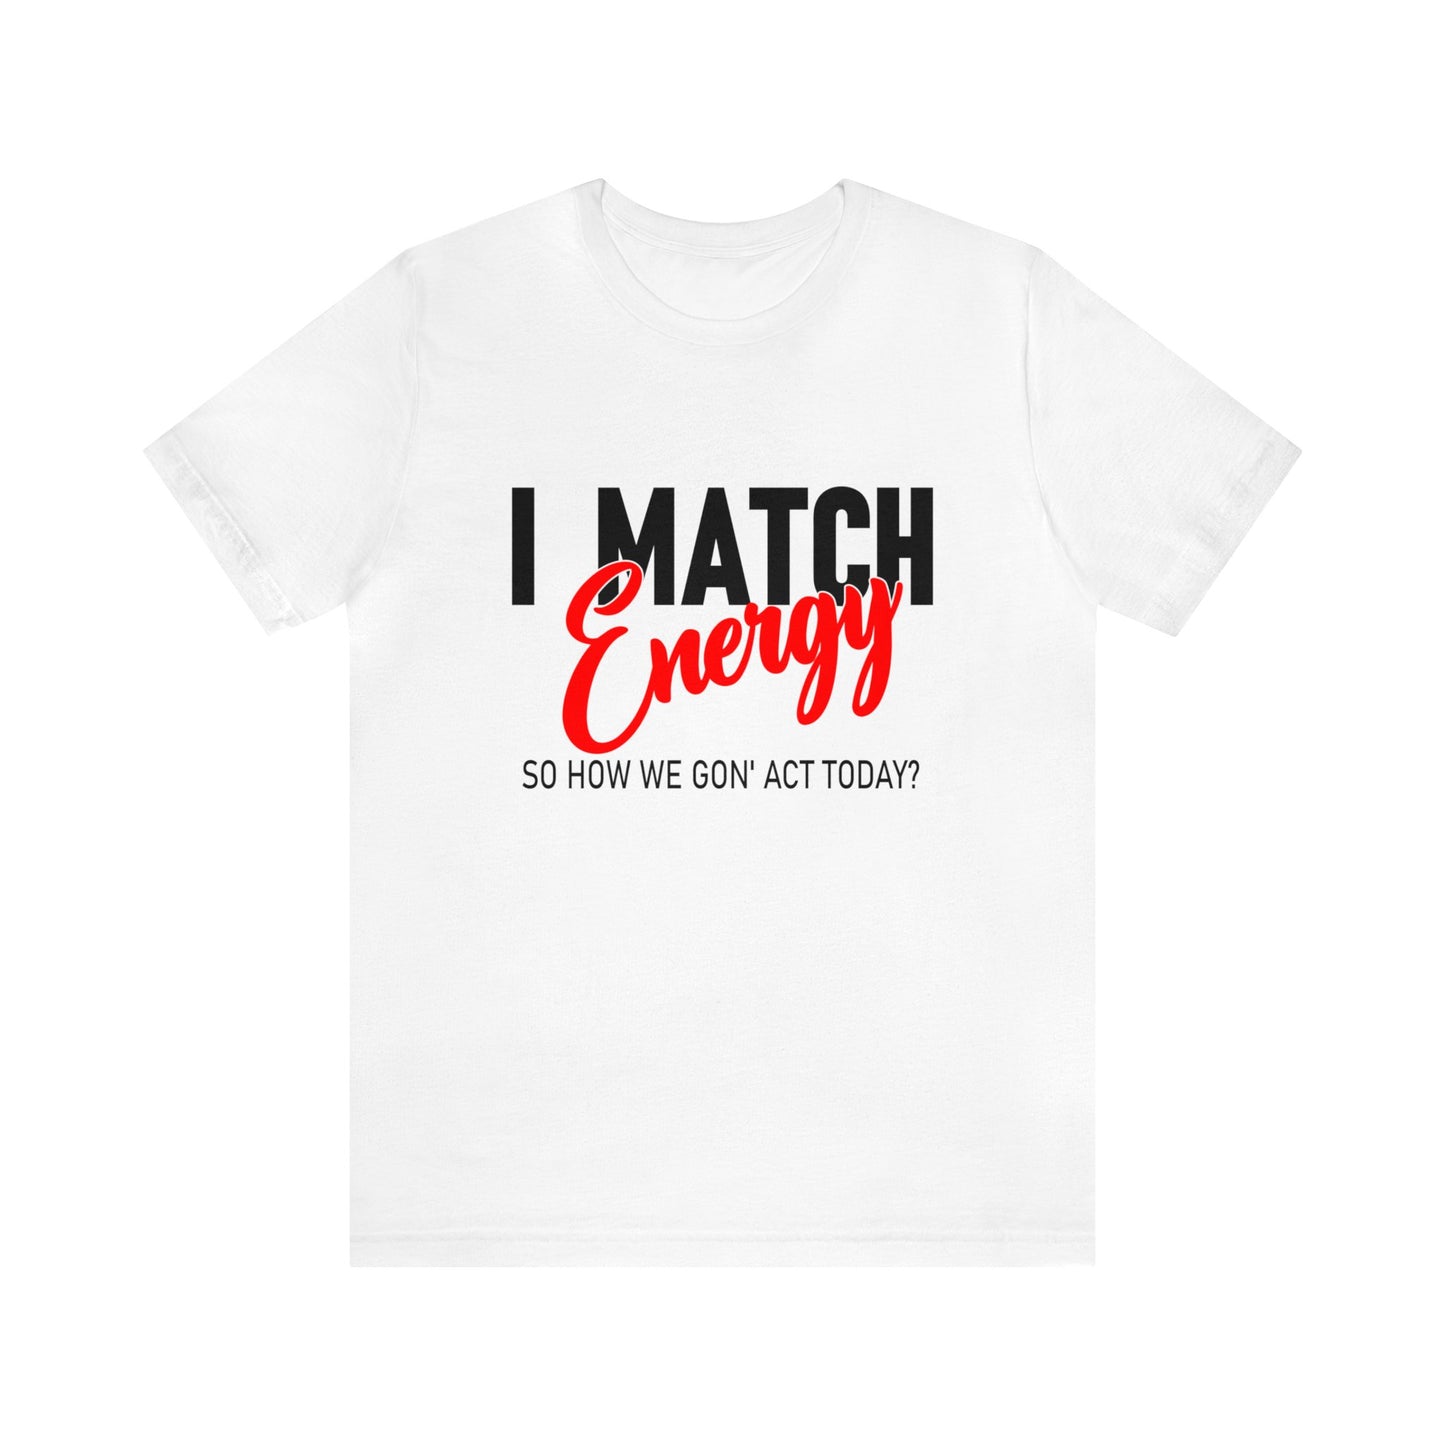 "I match energy, So how we gon' to act today?" Tee